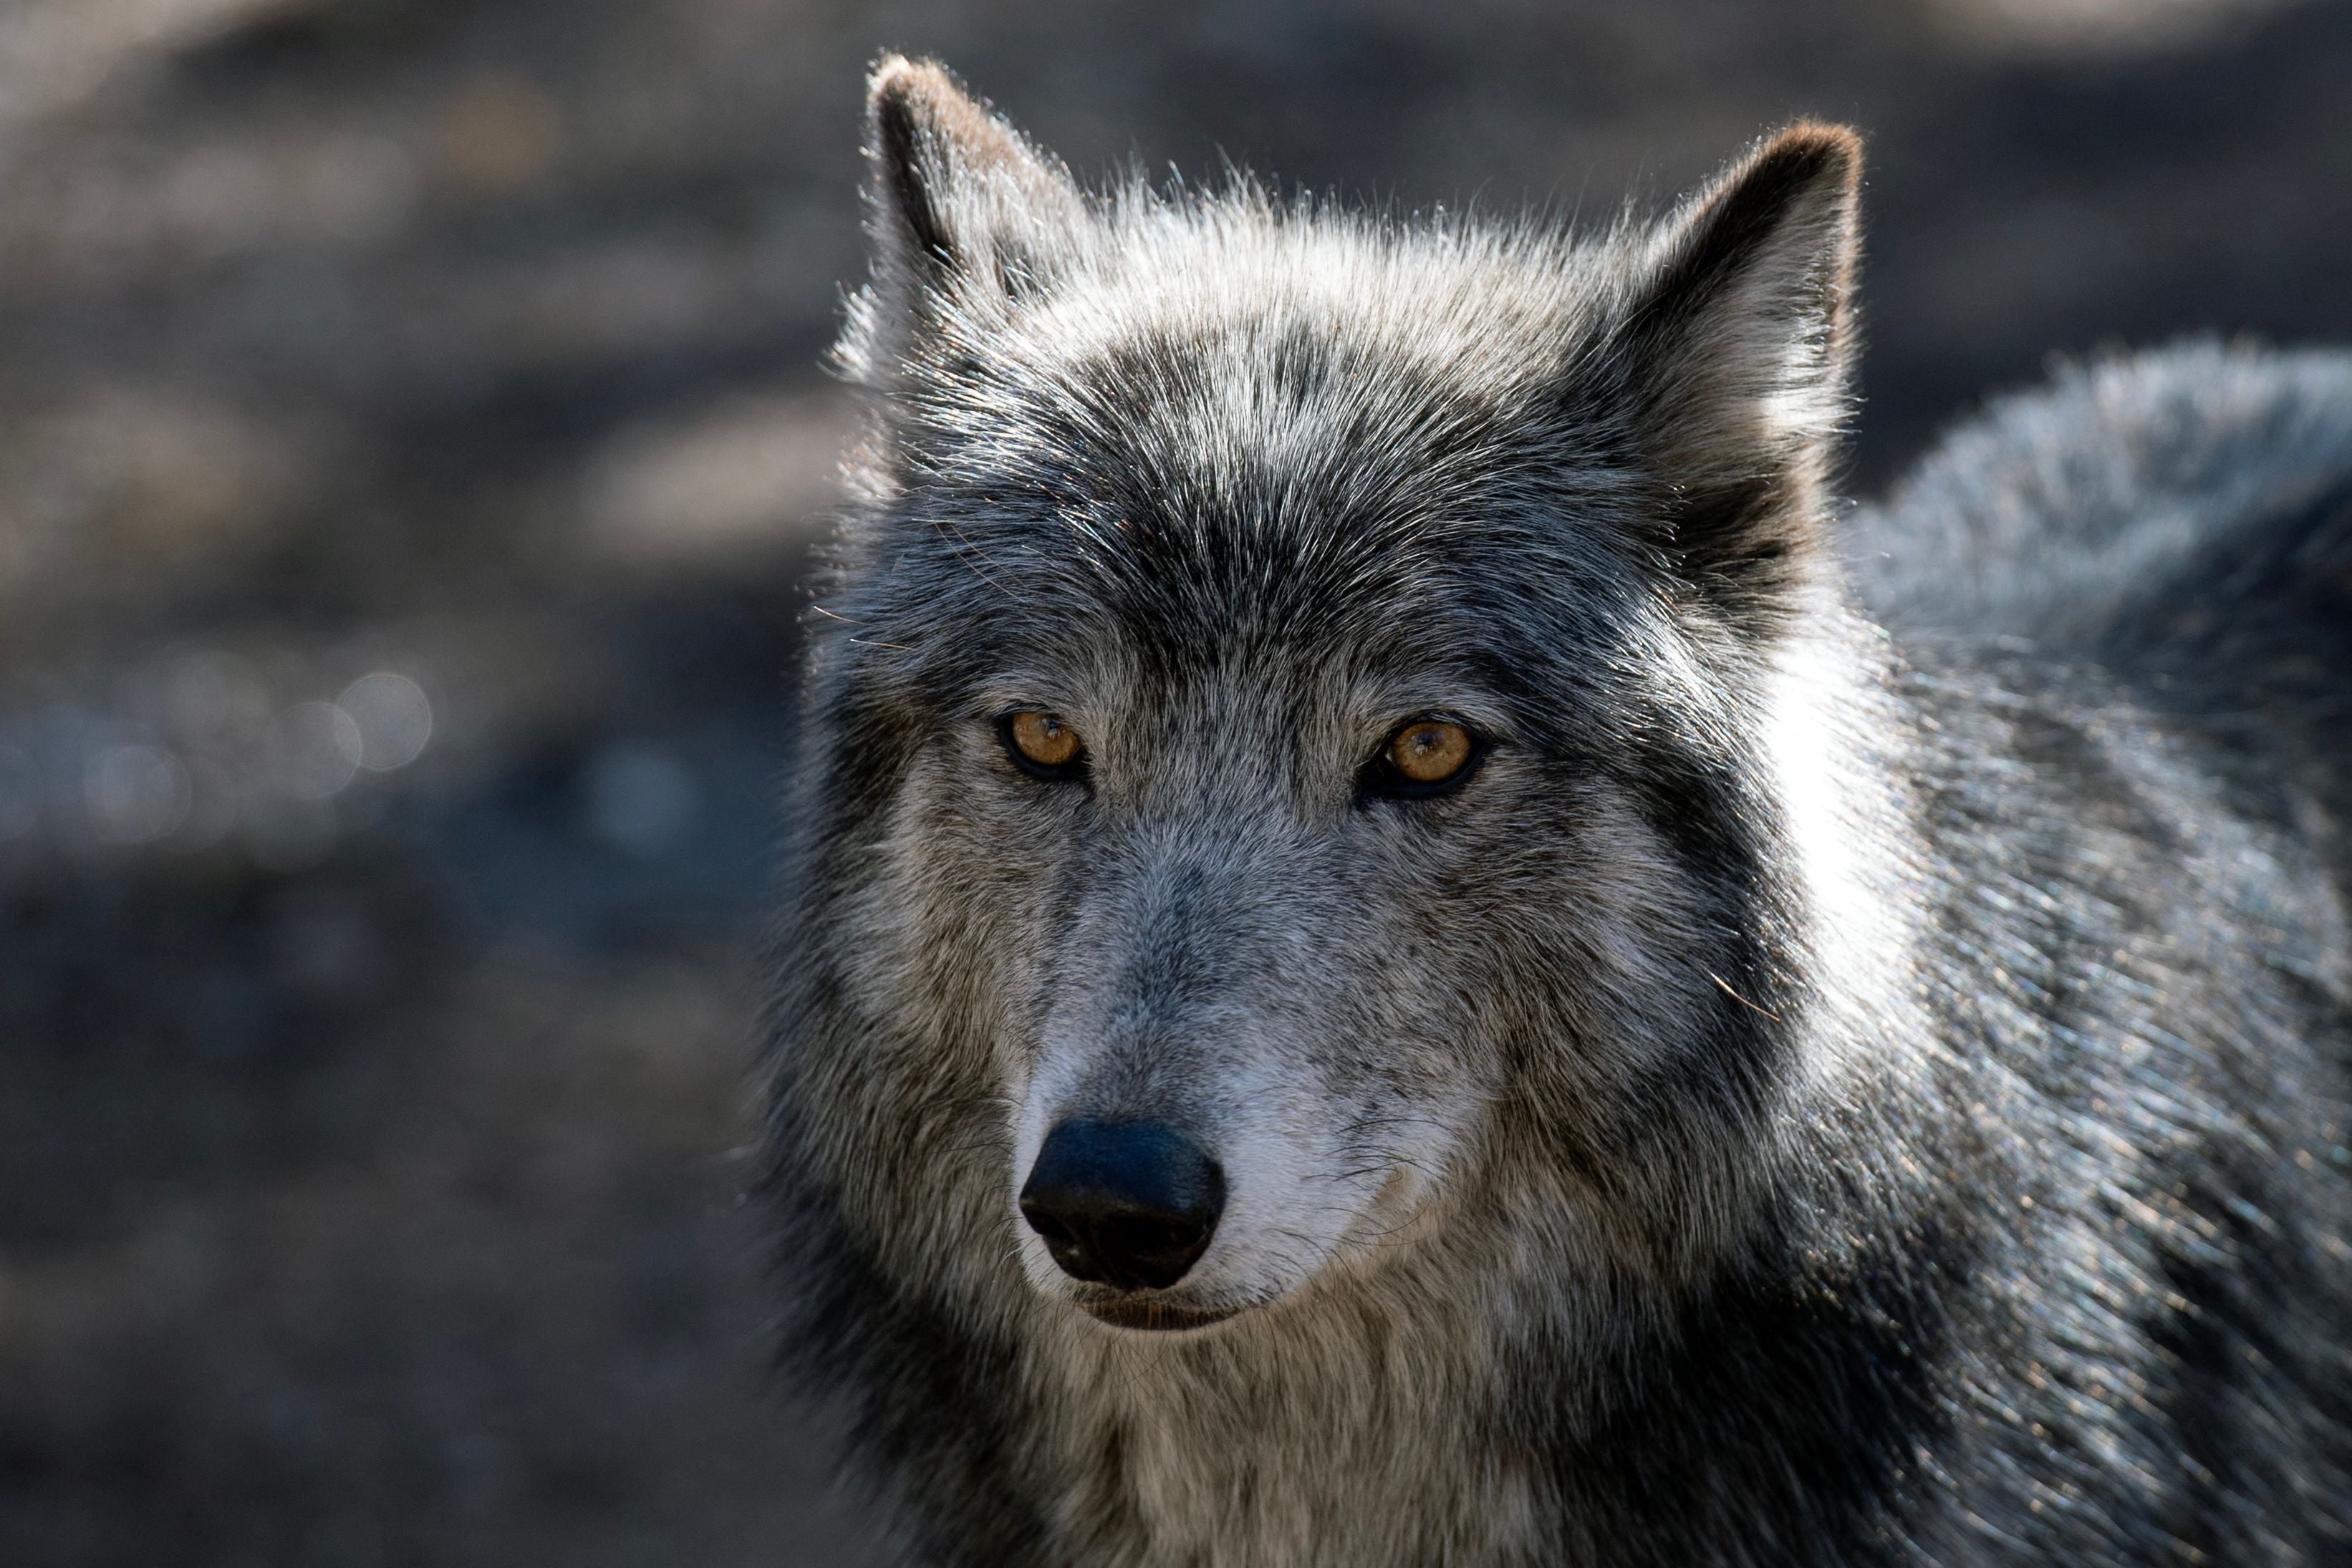 Gray wolves are not commonly seen in the Lower Peninsula of Michigan